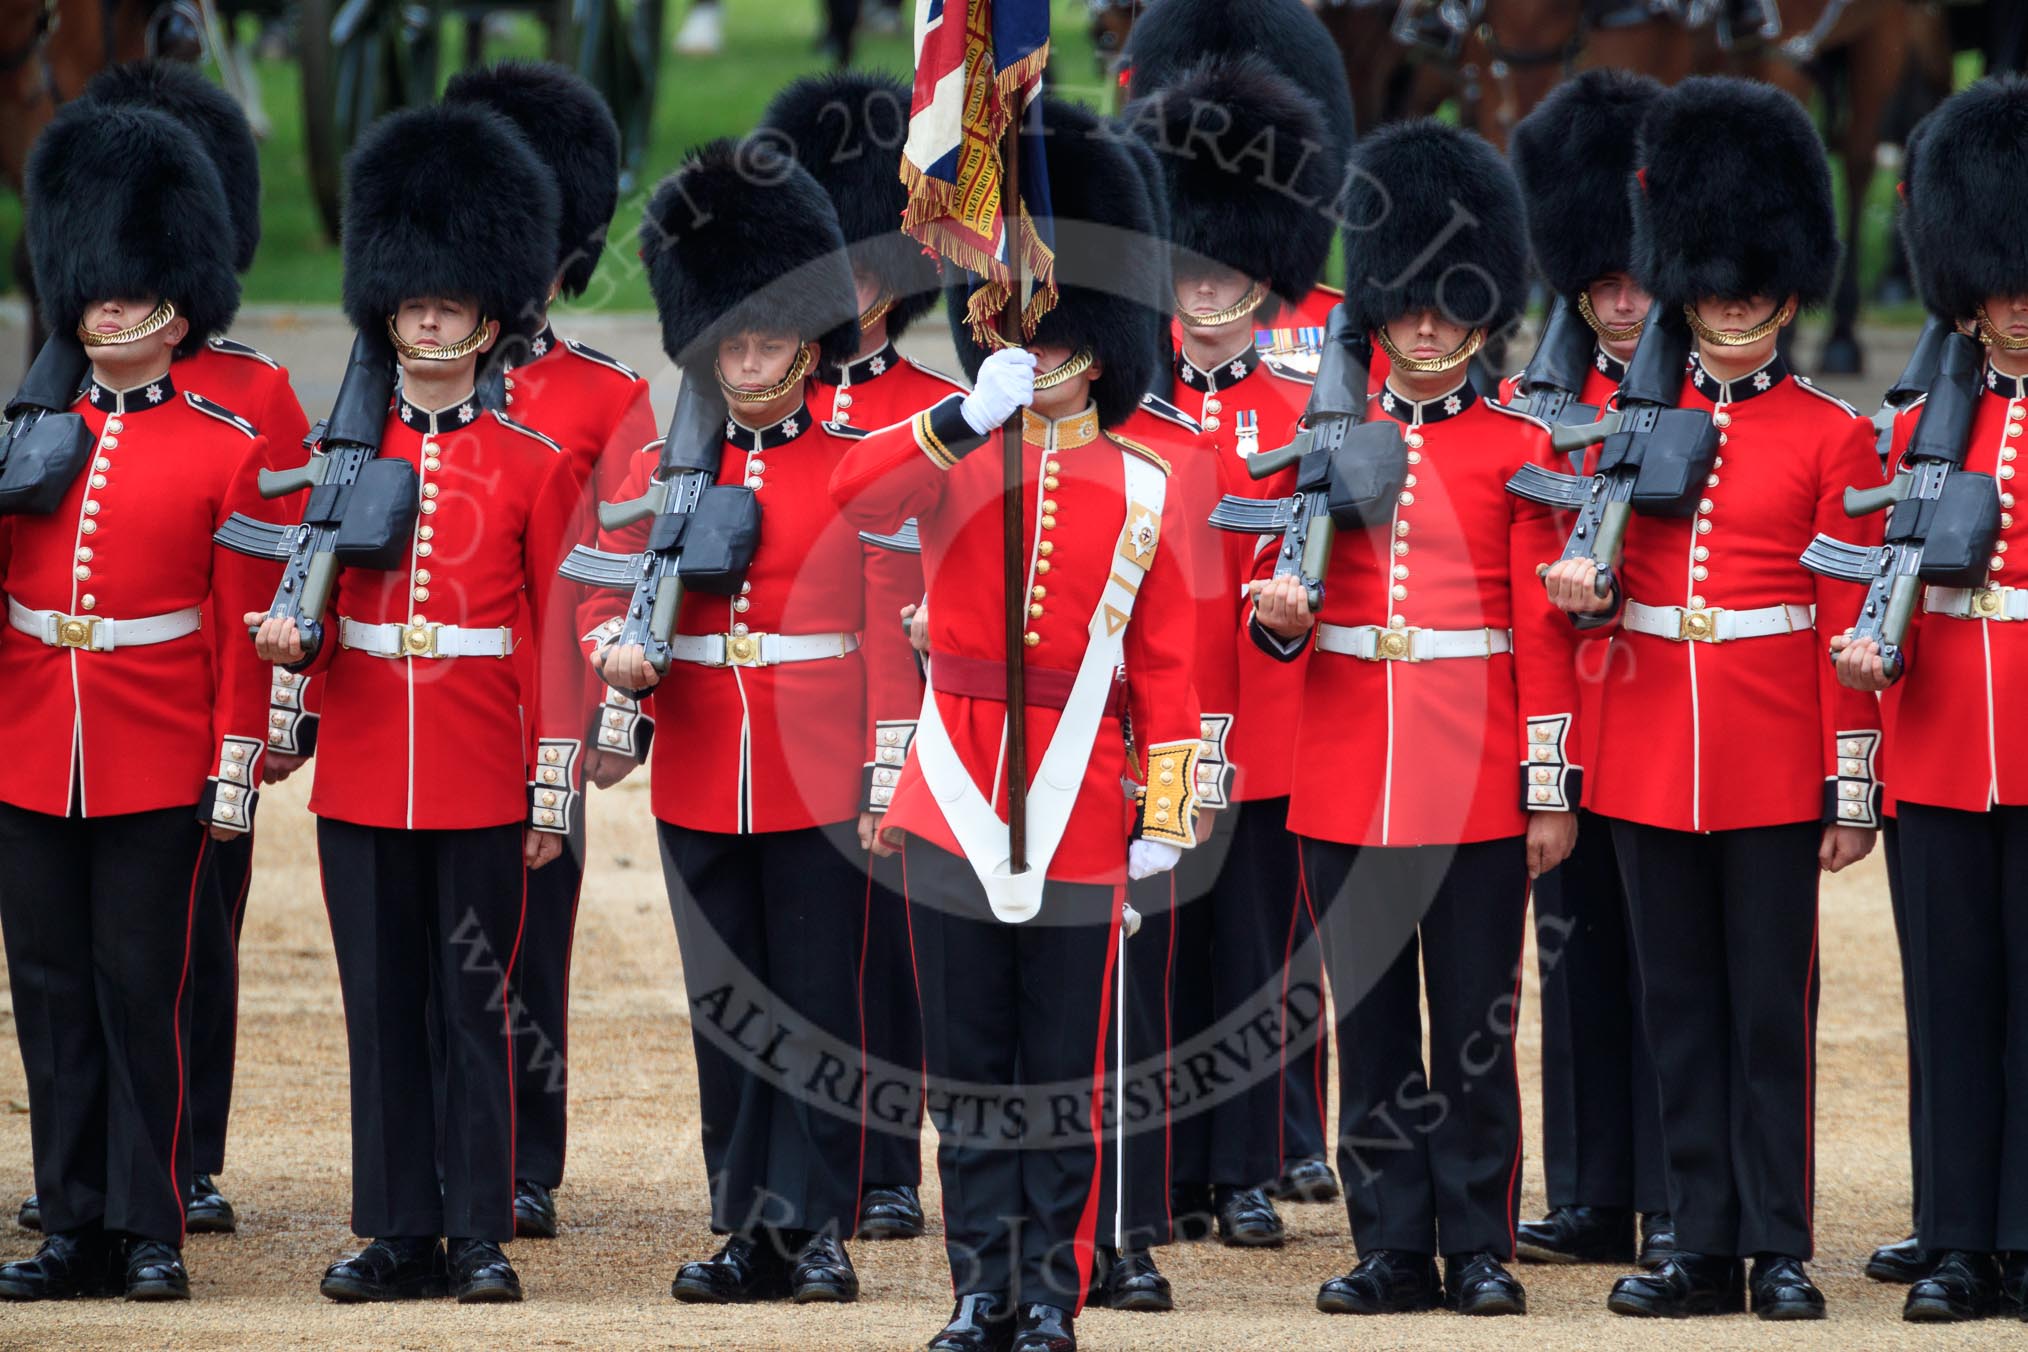 during The Colonel's Review {iptcyear4} (final rehearsal for Trooping the Colour, The Queen's Birthday Parade)  at Horse Guards Parade, Westminster, London, 2 June 2018, 11:29.